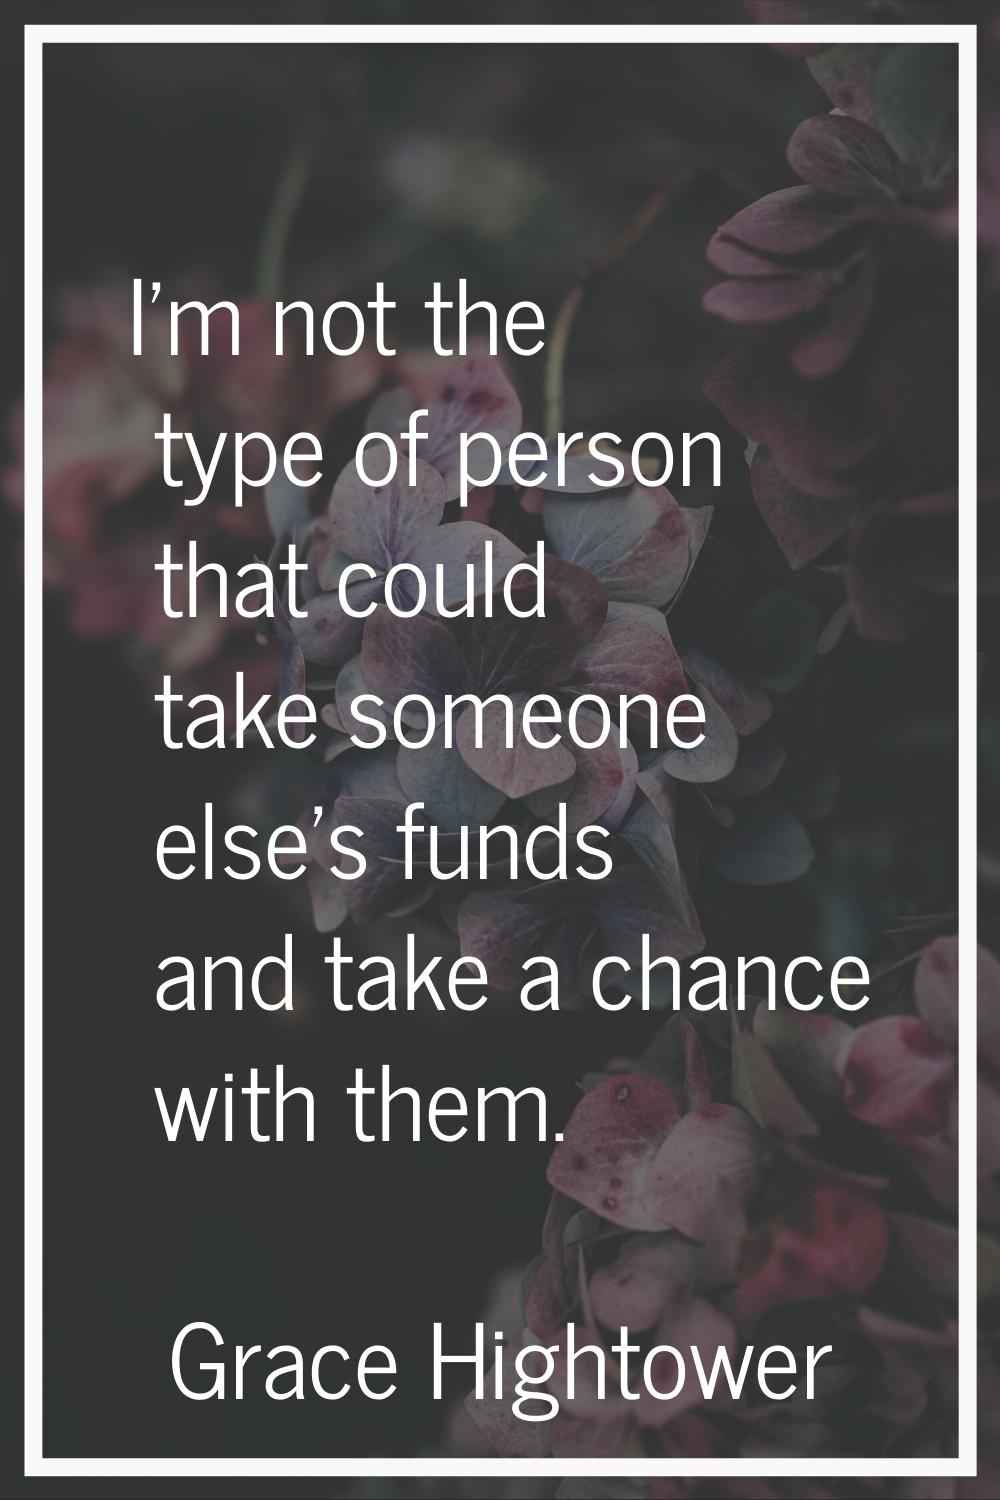 I'm not the type of person that could take someone else's funds and take a chance with them.